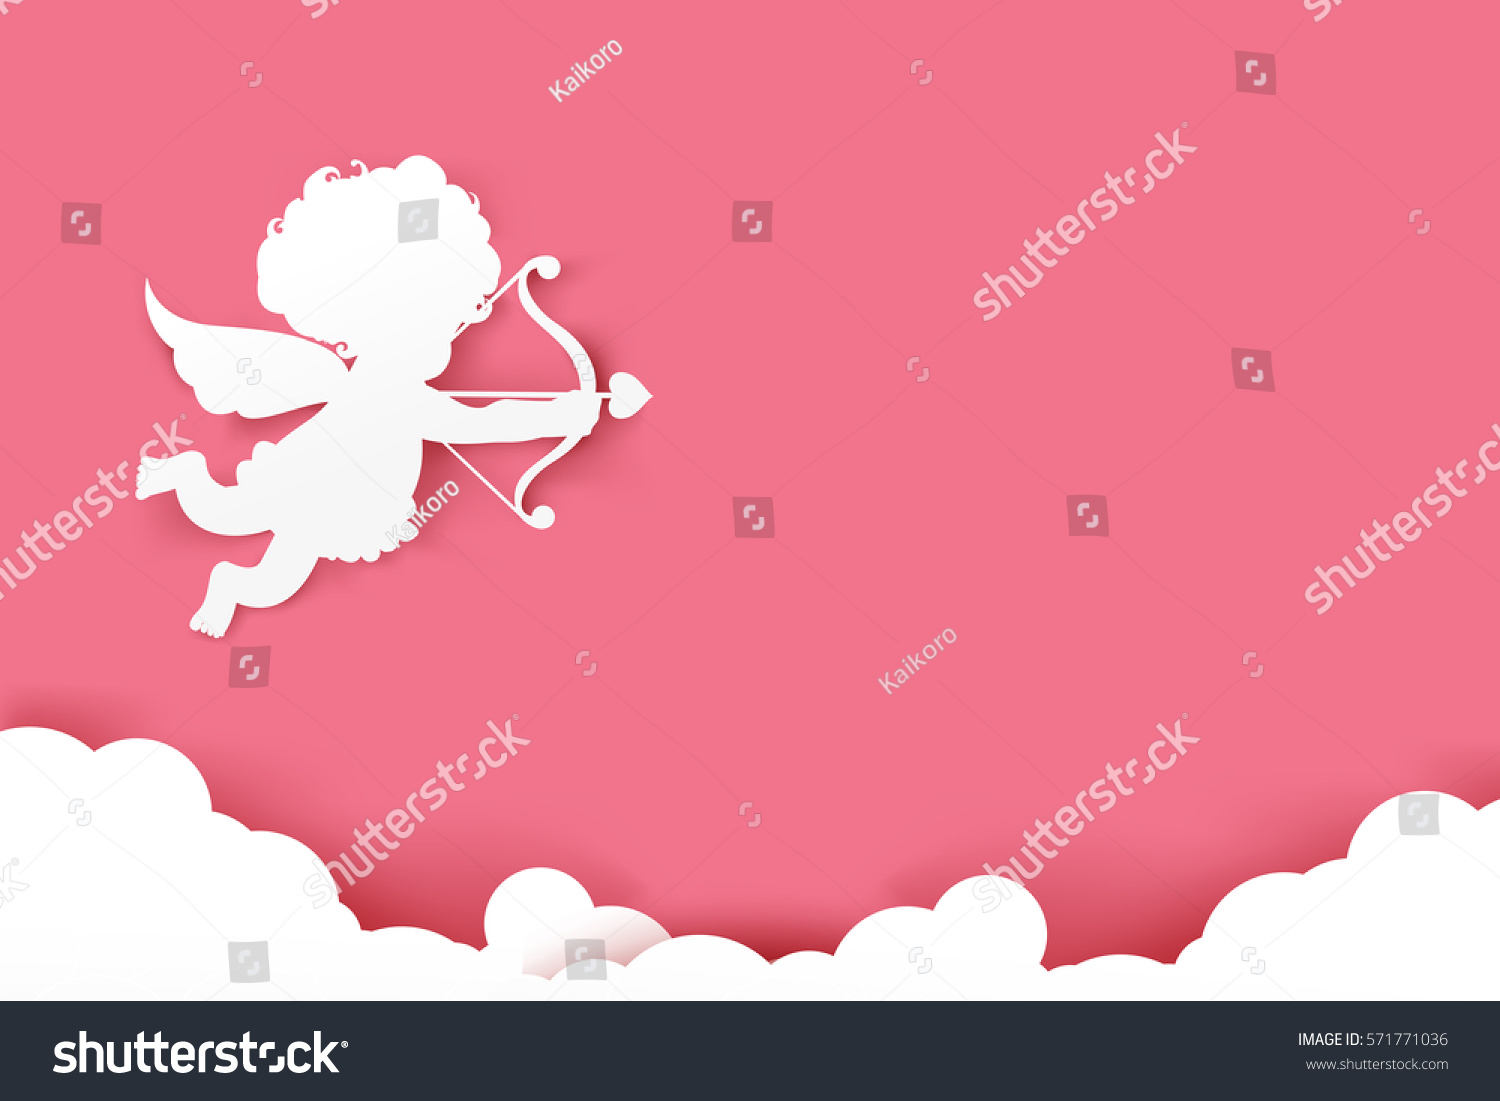 SVG of Cupid holding arrow with shadow on pink background with copy space vector illustration eps 10 svg